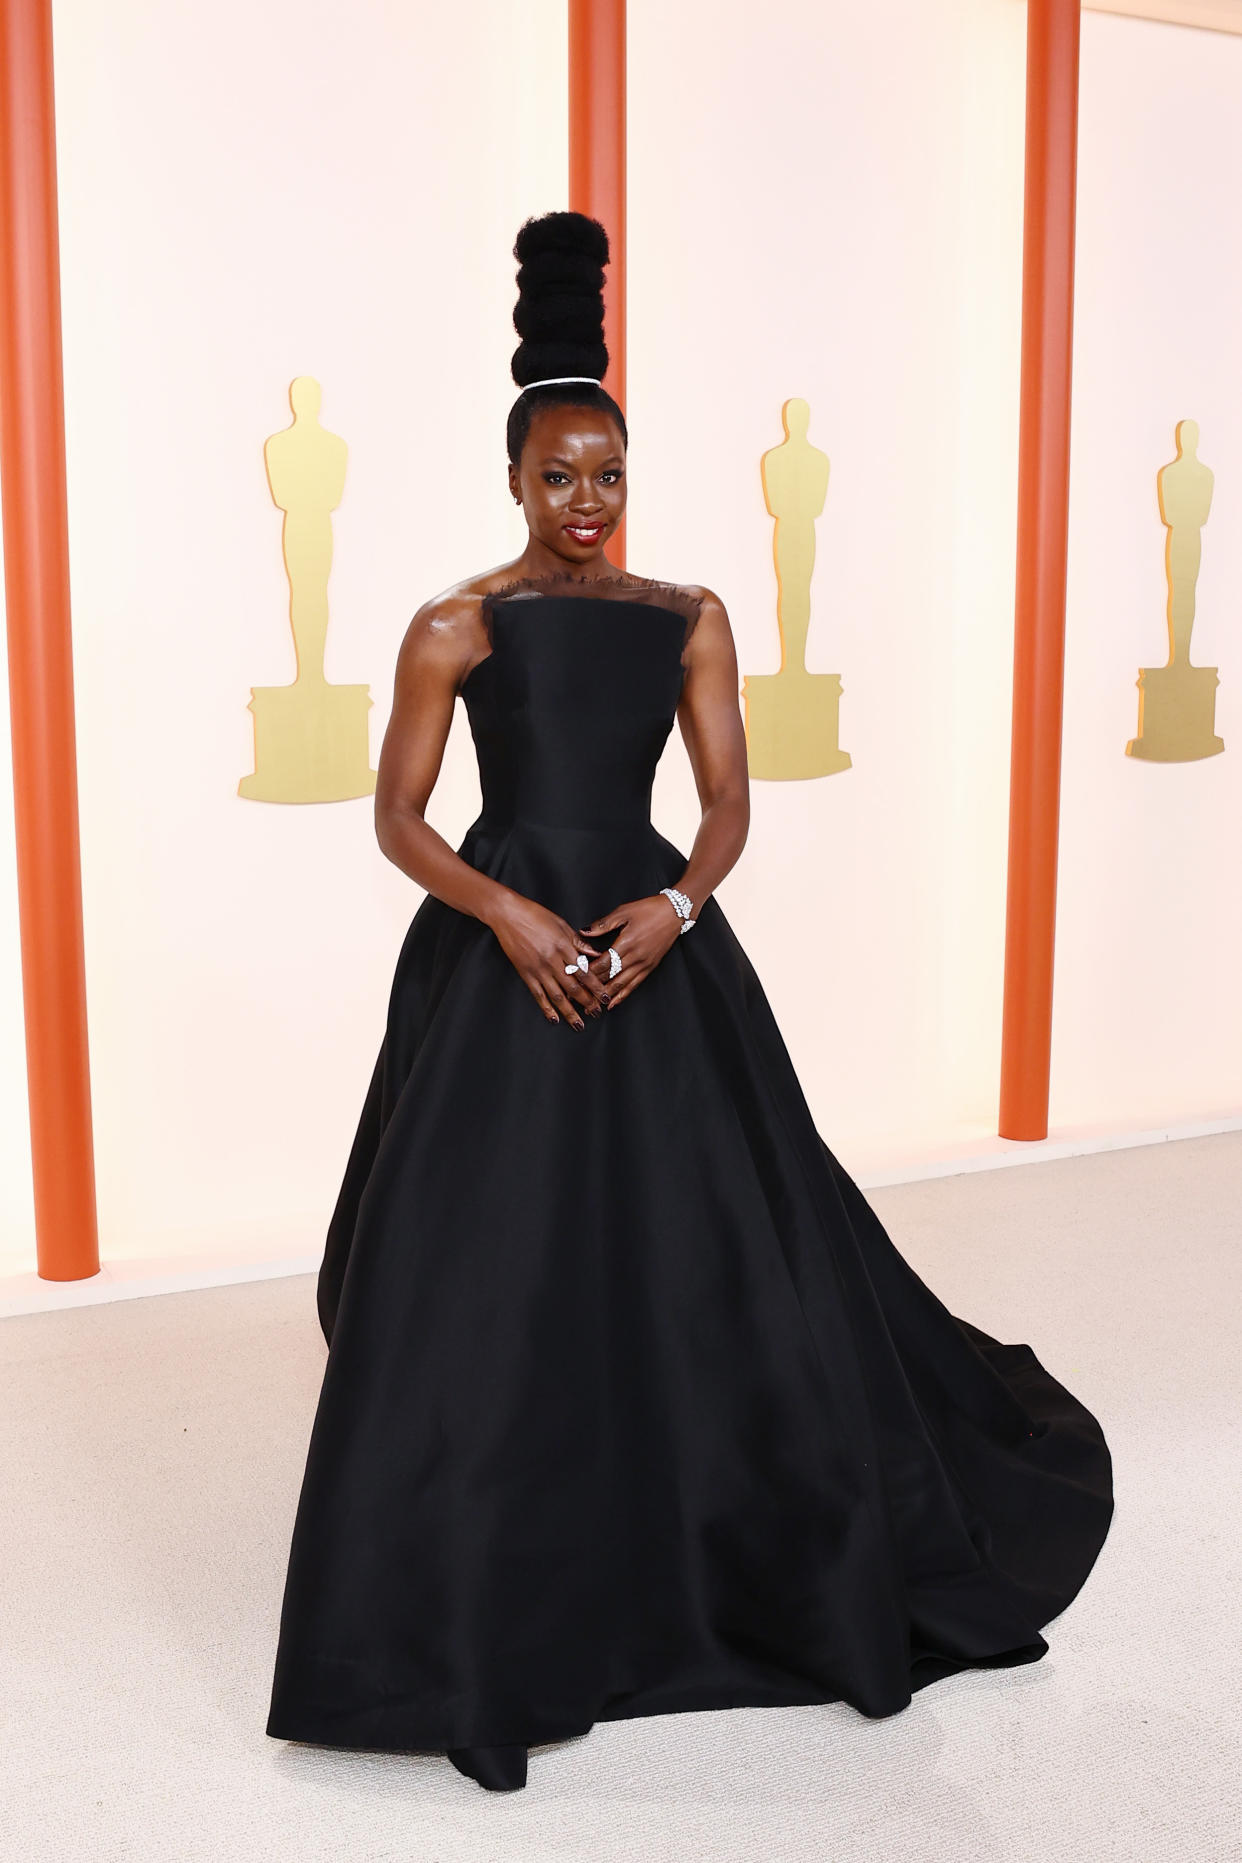 HOLLYWOOD, CALIFORNIA - MARCH 12: Danai Gurira attends the 95th Annual Academy Awards on March 12, 2023 in Hollywood, California. (Photo by Arturo Holmes/Getty Images )